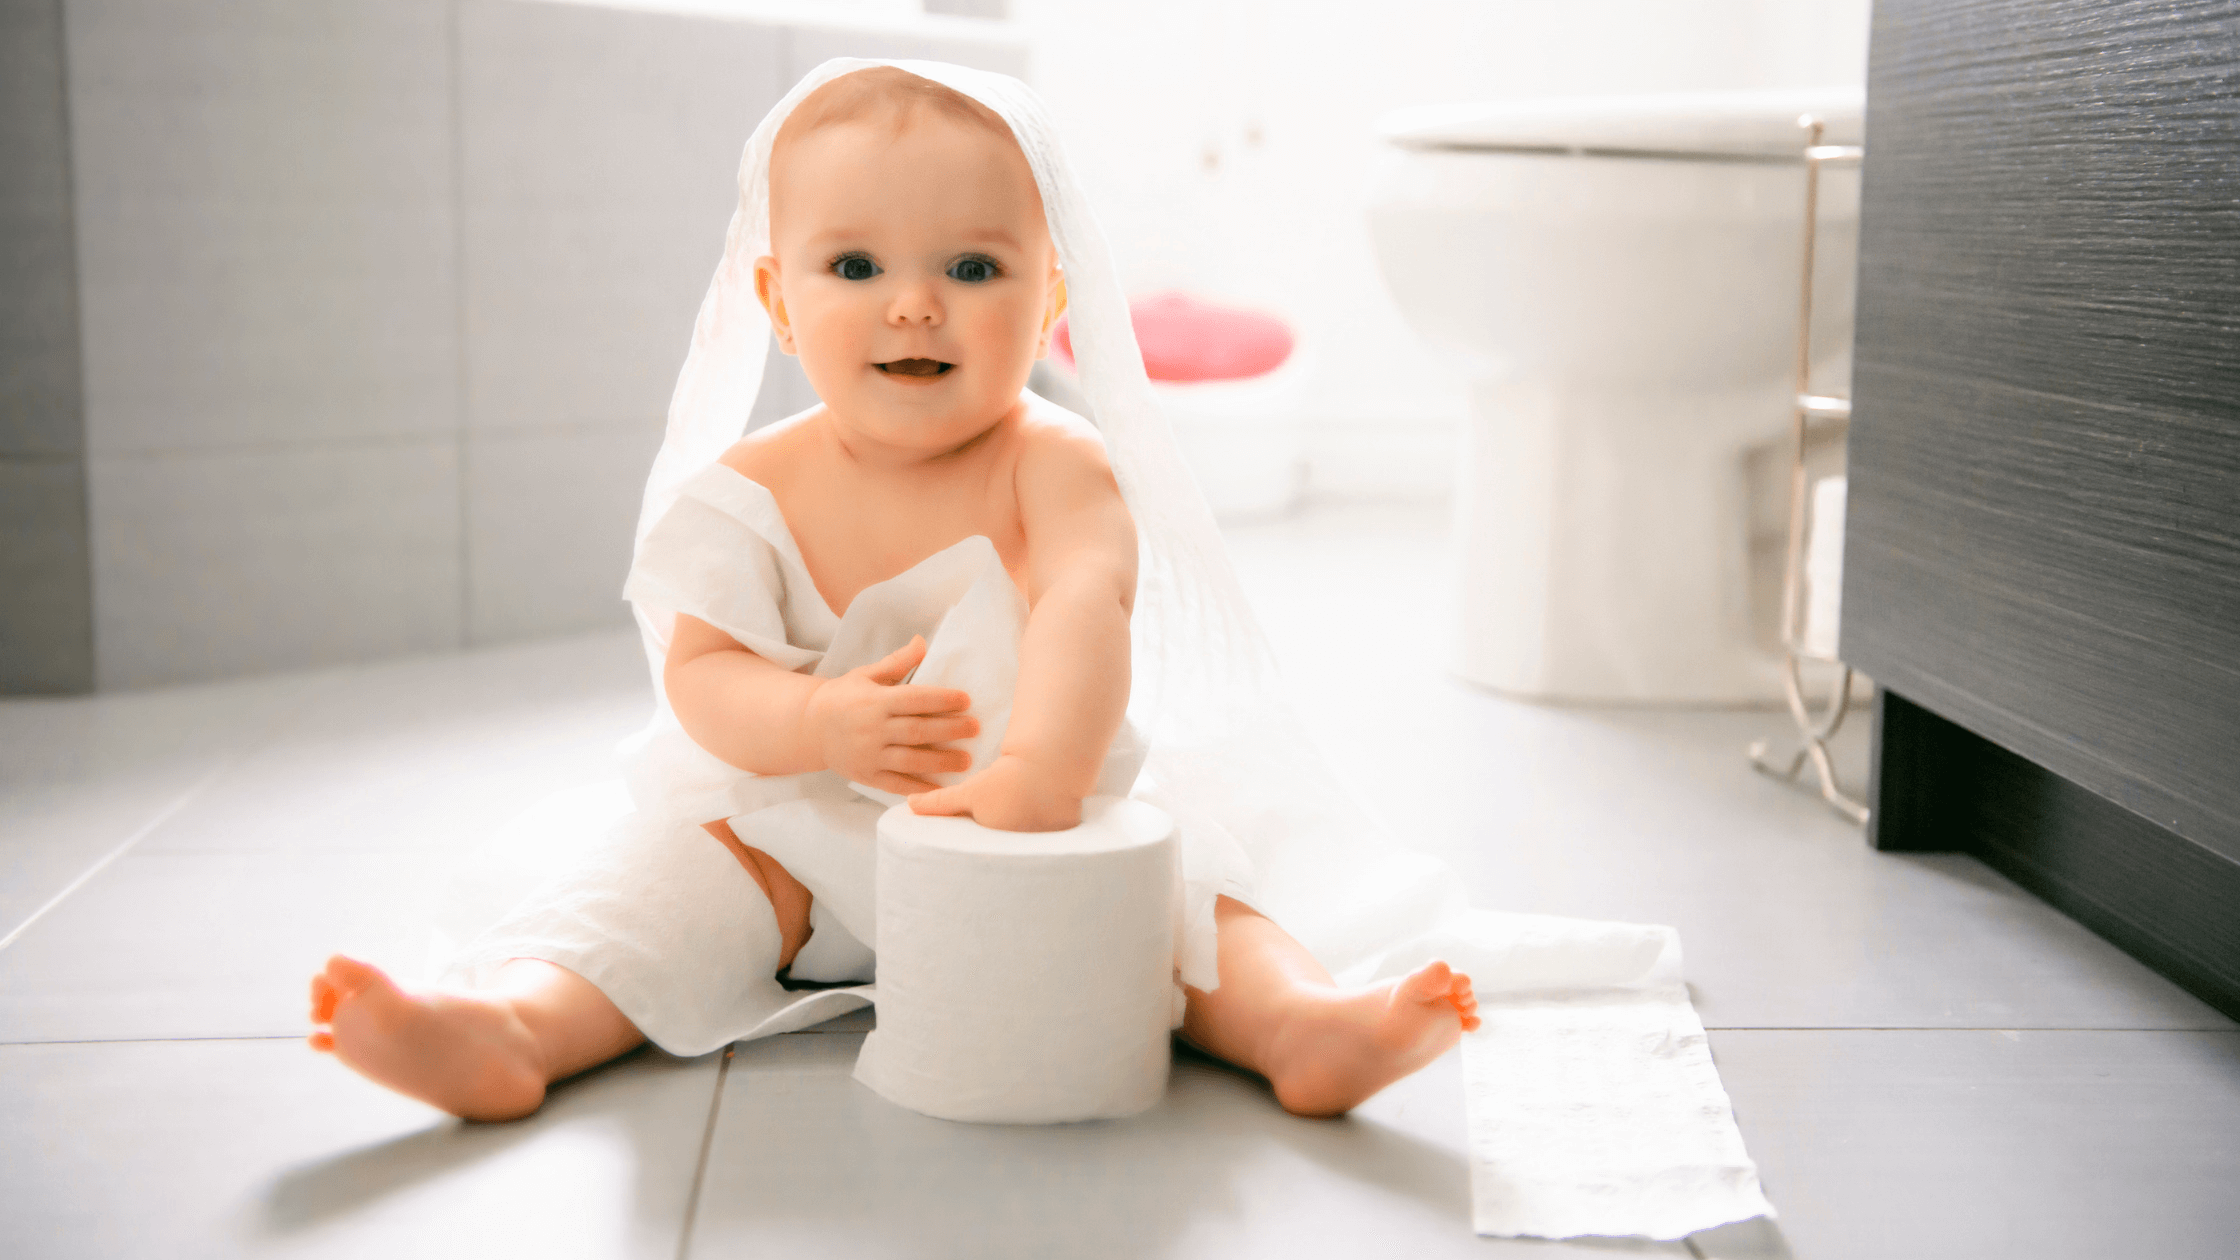 Are Nappies Stunting Your Child's Ability To Potty Train?